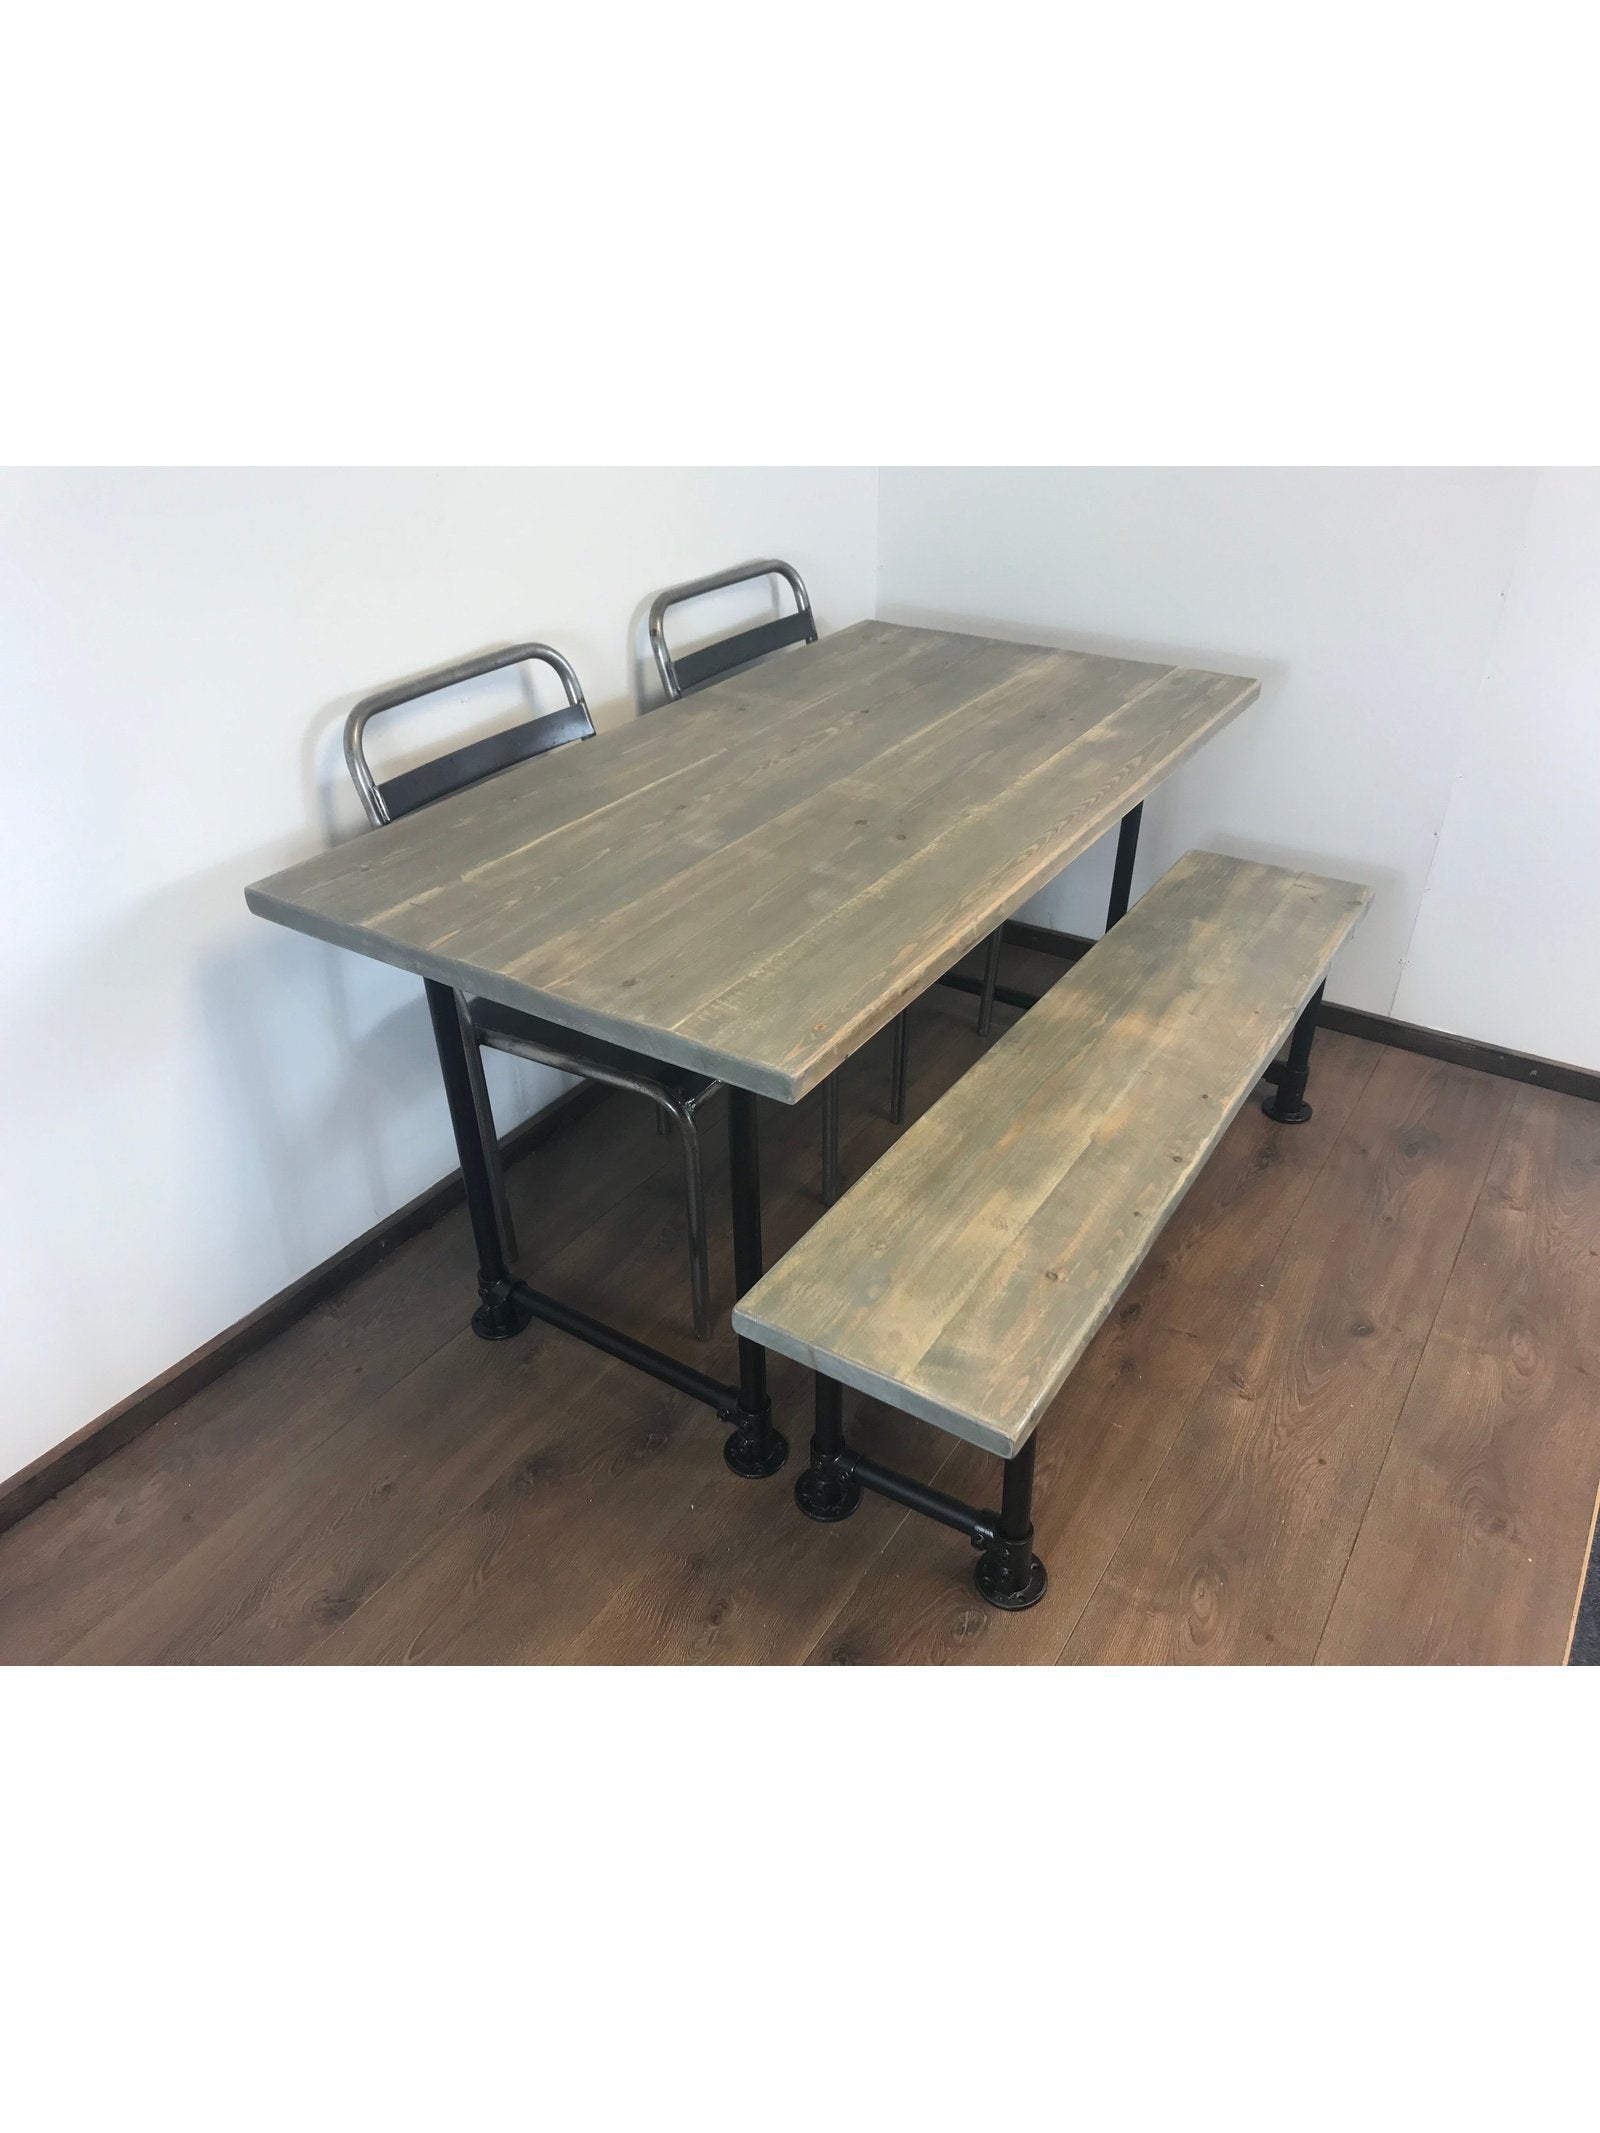 Dining table and bench set, choice of 5 wood finishes, Black industrial style legs, Rustic sustainable wood, rustic dining table THE FIRTREE